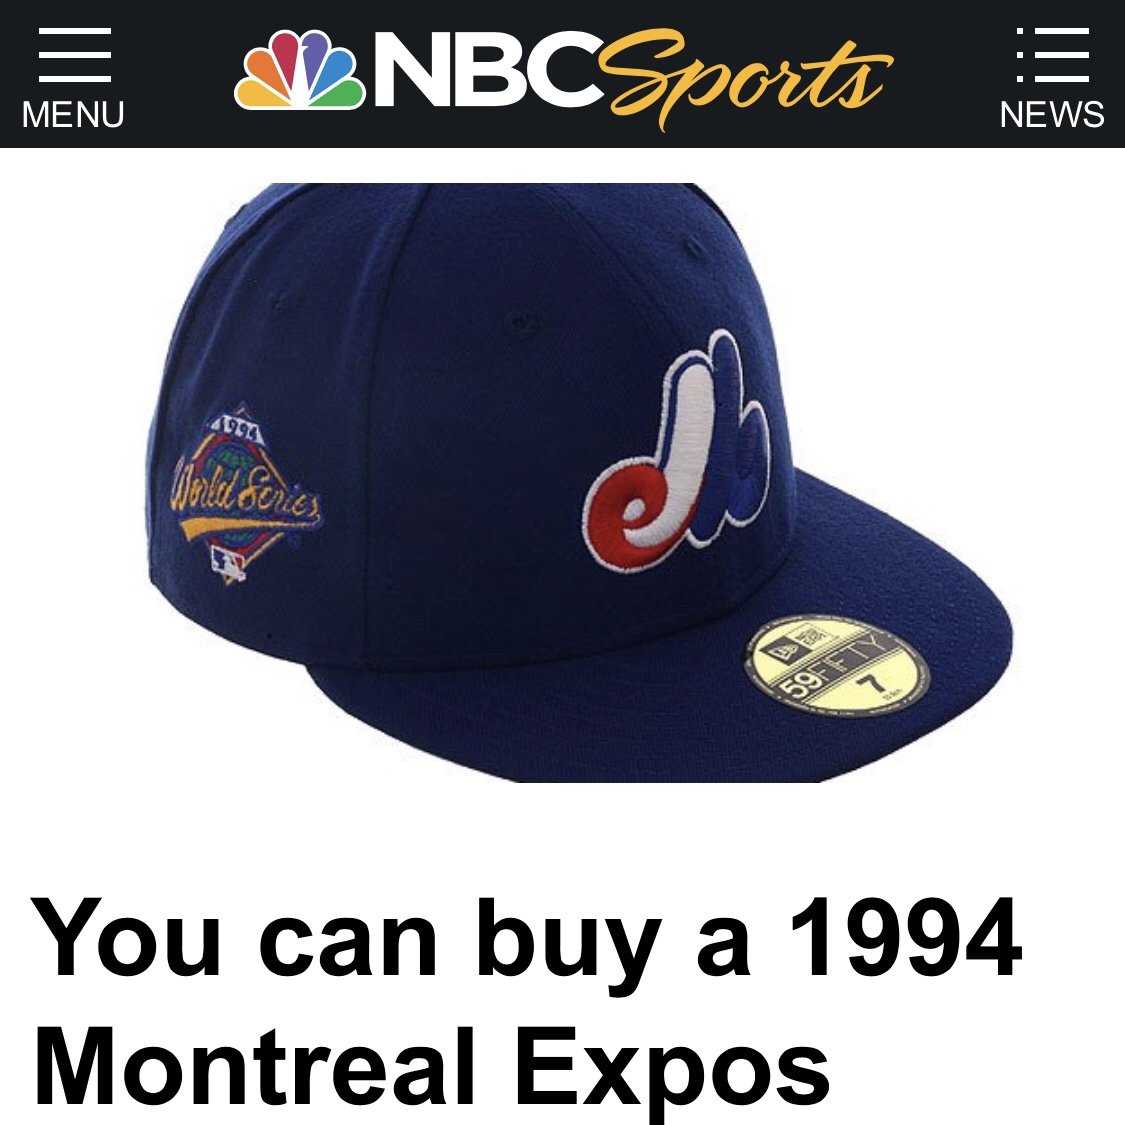 You can buy a 1994 Montreal Expos World Series Cap - NBC Sports